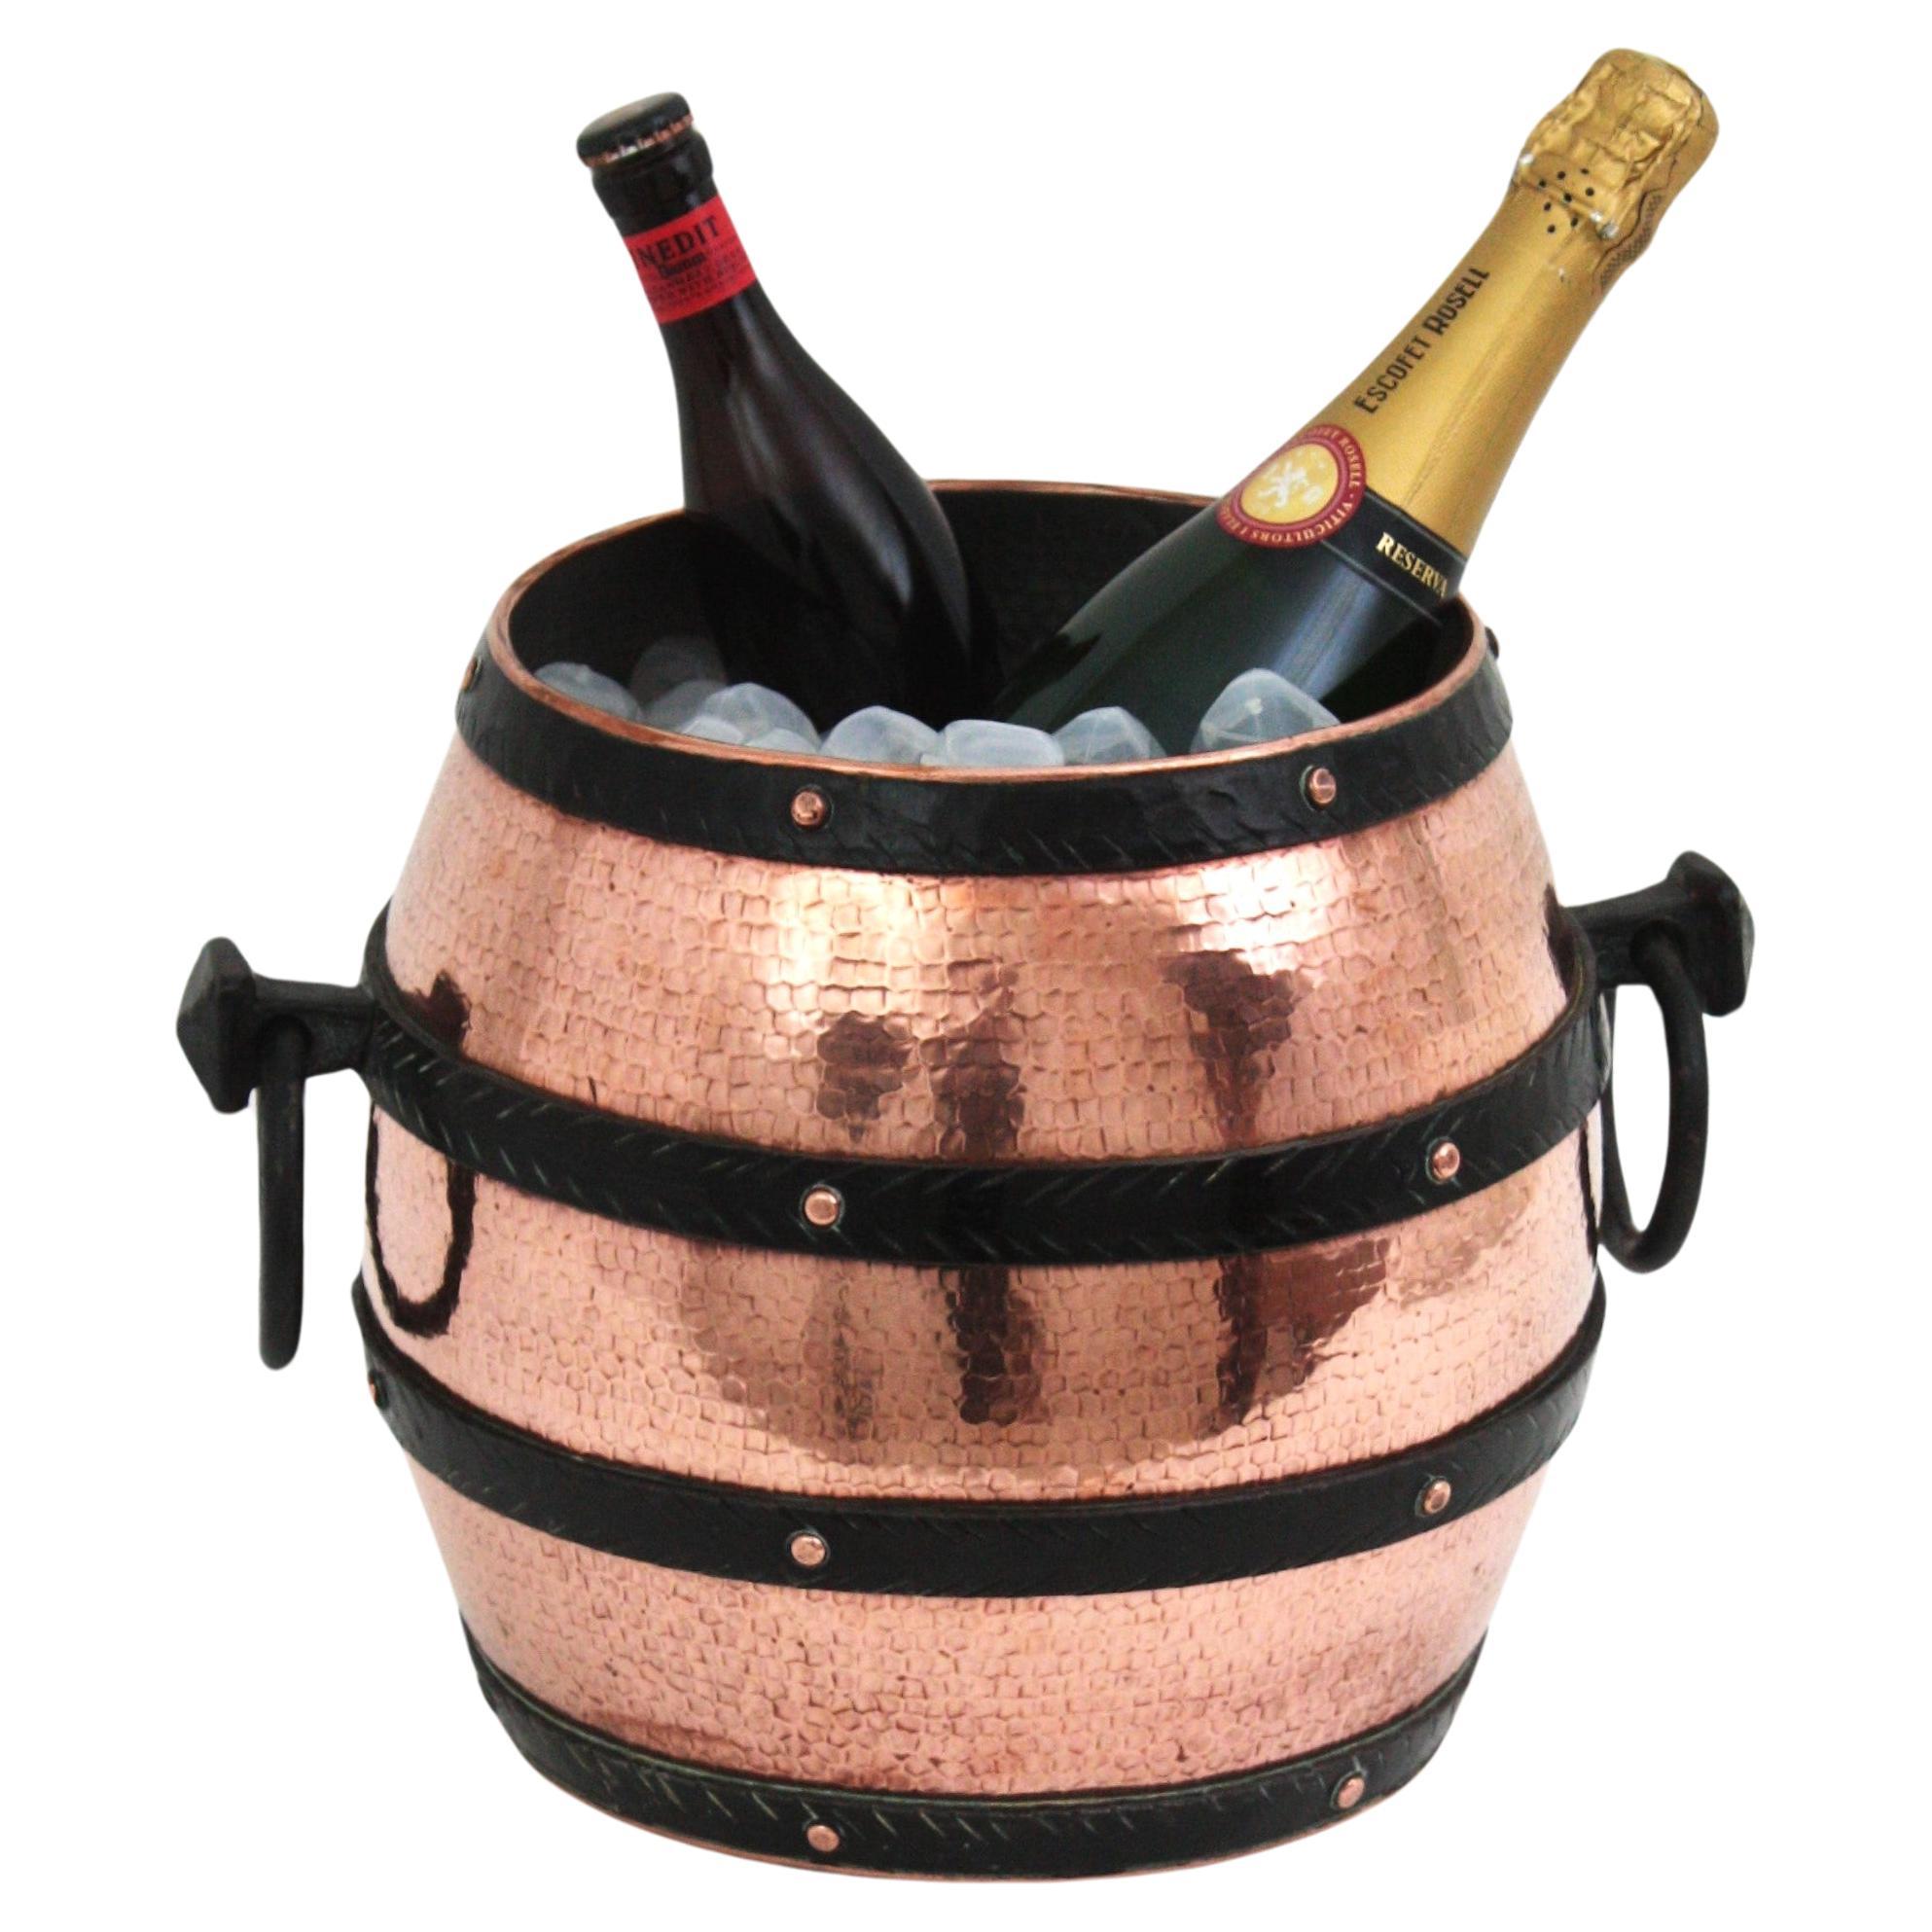 Hand forged copper and iron barrel shaped wine cooler, Spain, 1940s
 Eyecatching barrel copper ice bucket with iron braces and ring handles at both sides. The copper ice container is richly adorned by the hammer marks. It allows to place inside two